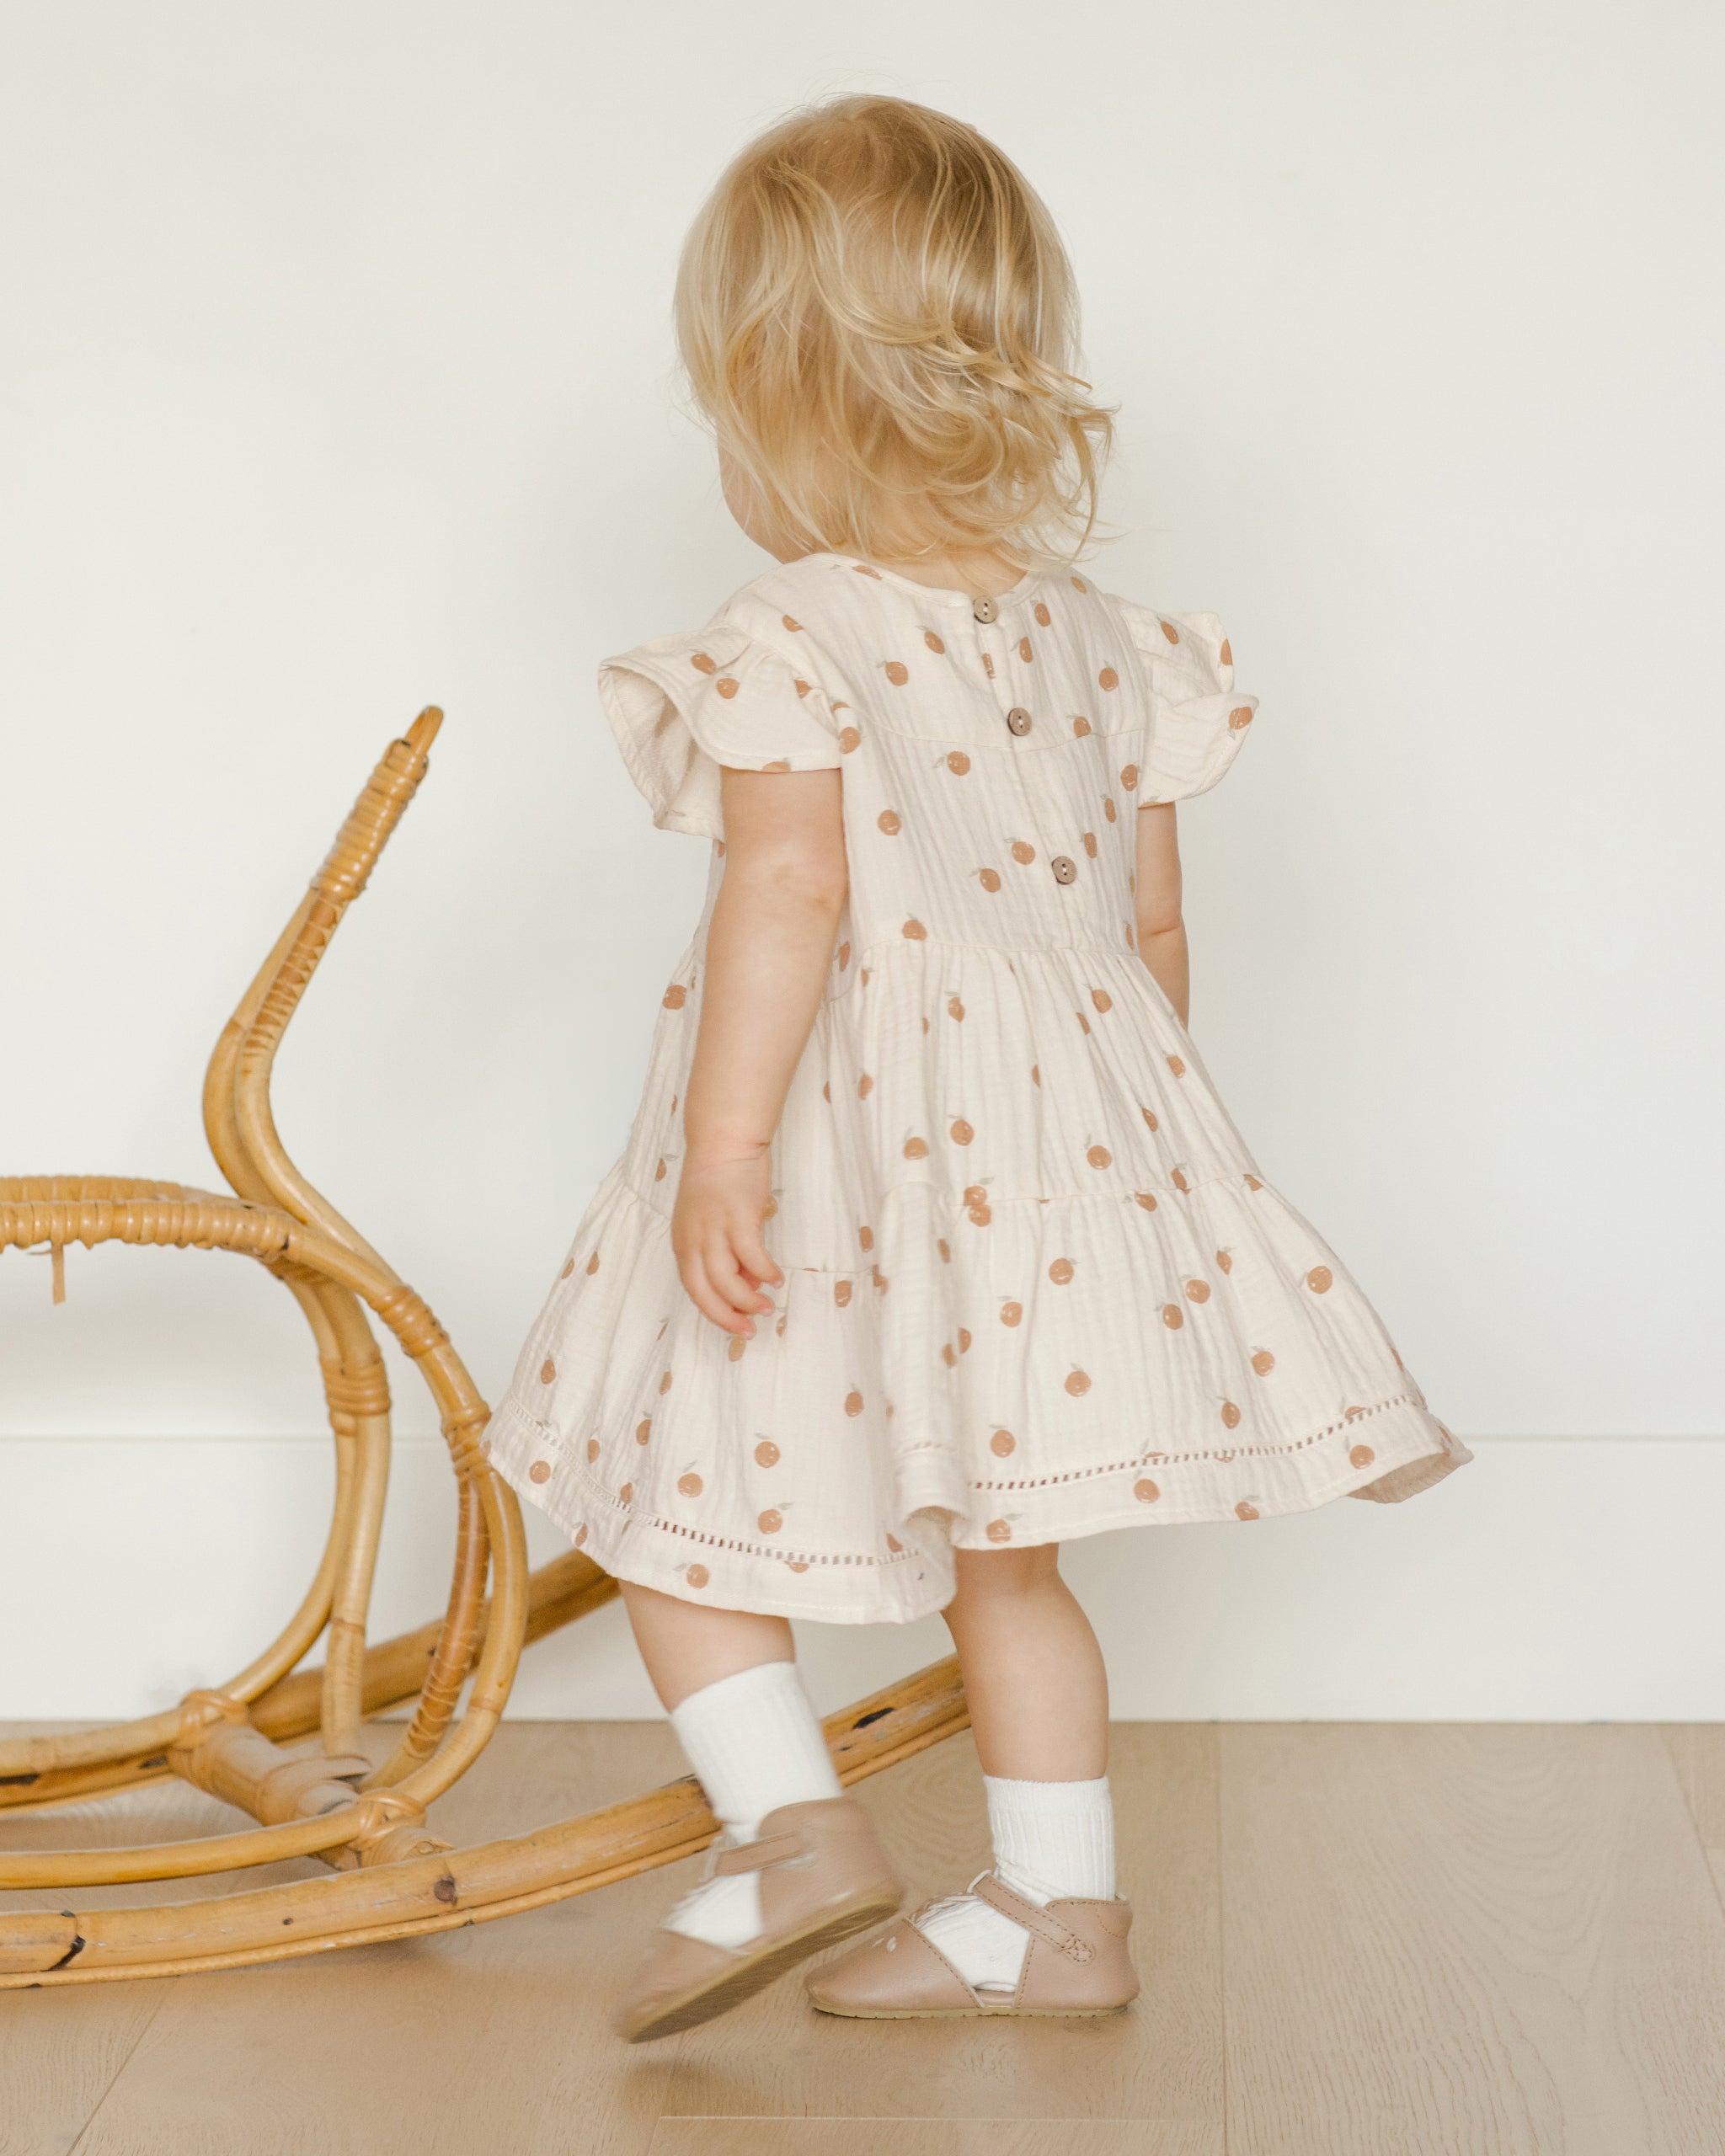 Lily Dress || Oranges - Rylee + Cru | Kids Clothes | Trendy Baby Clothes | Modern Infant Outfits |